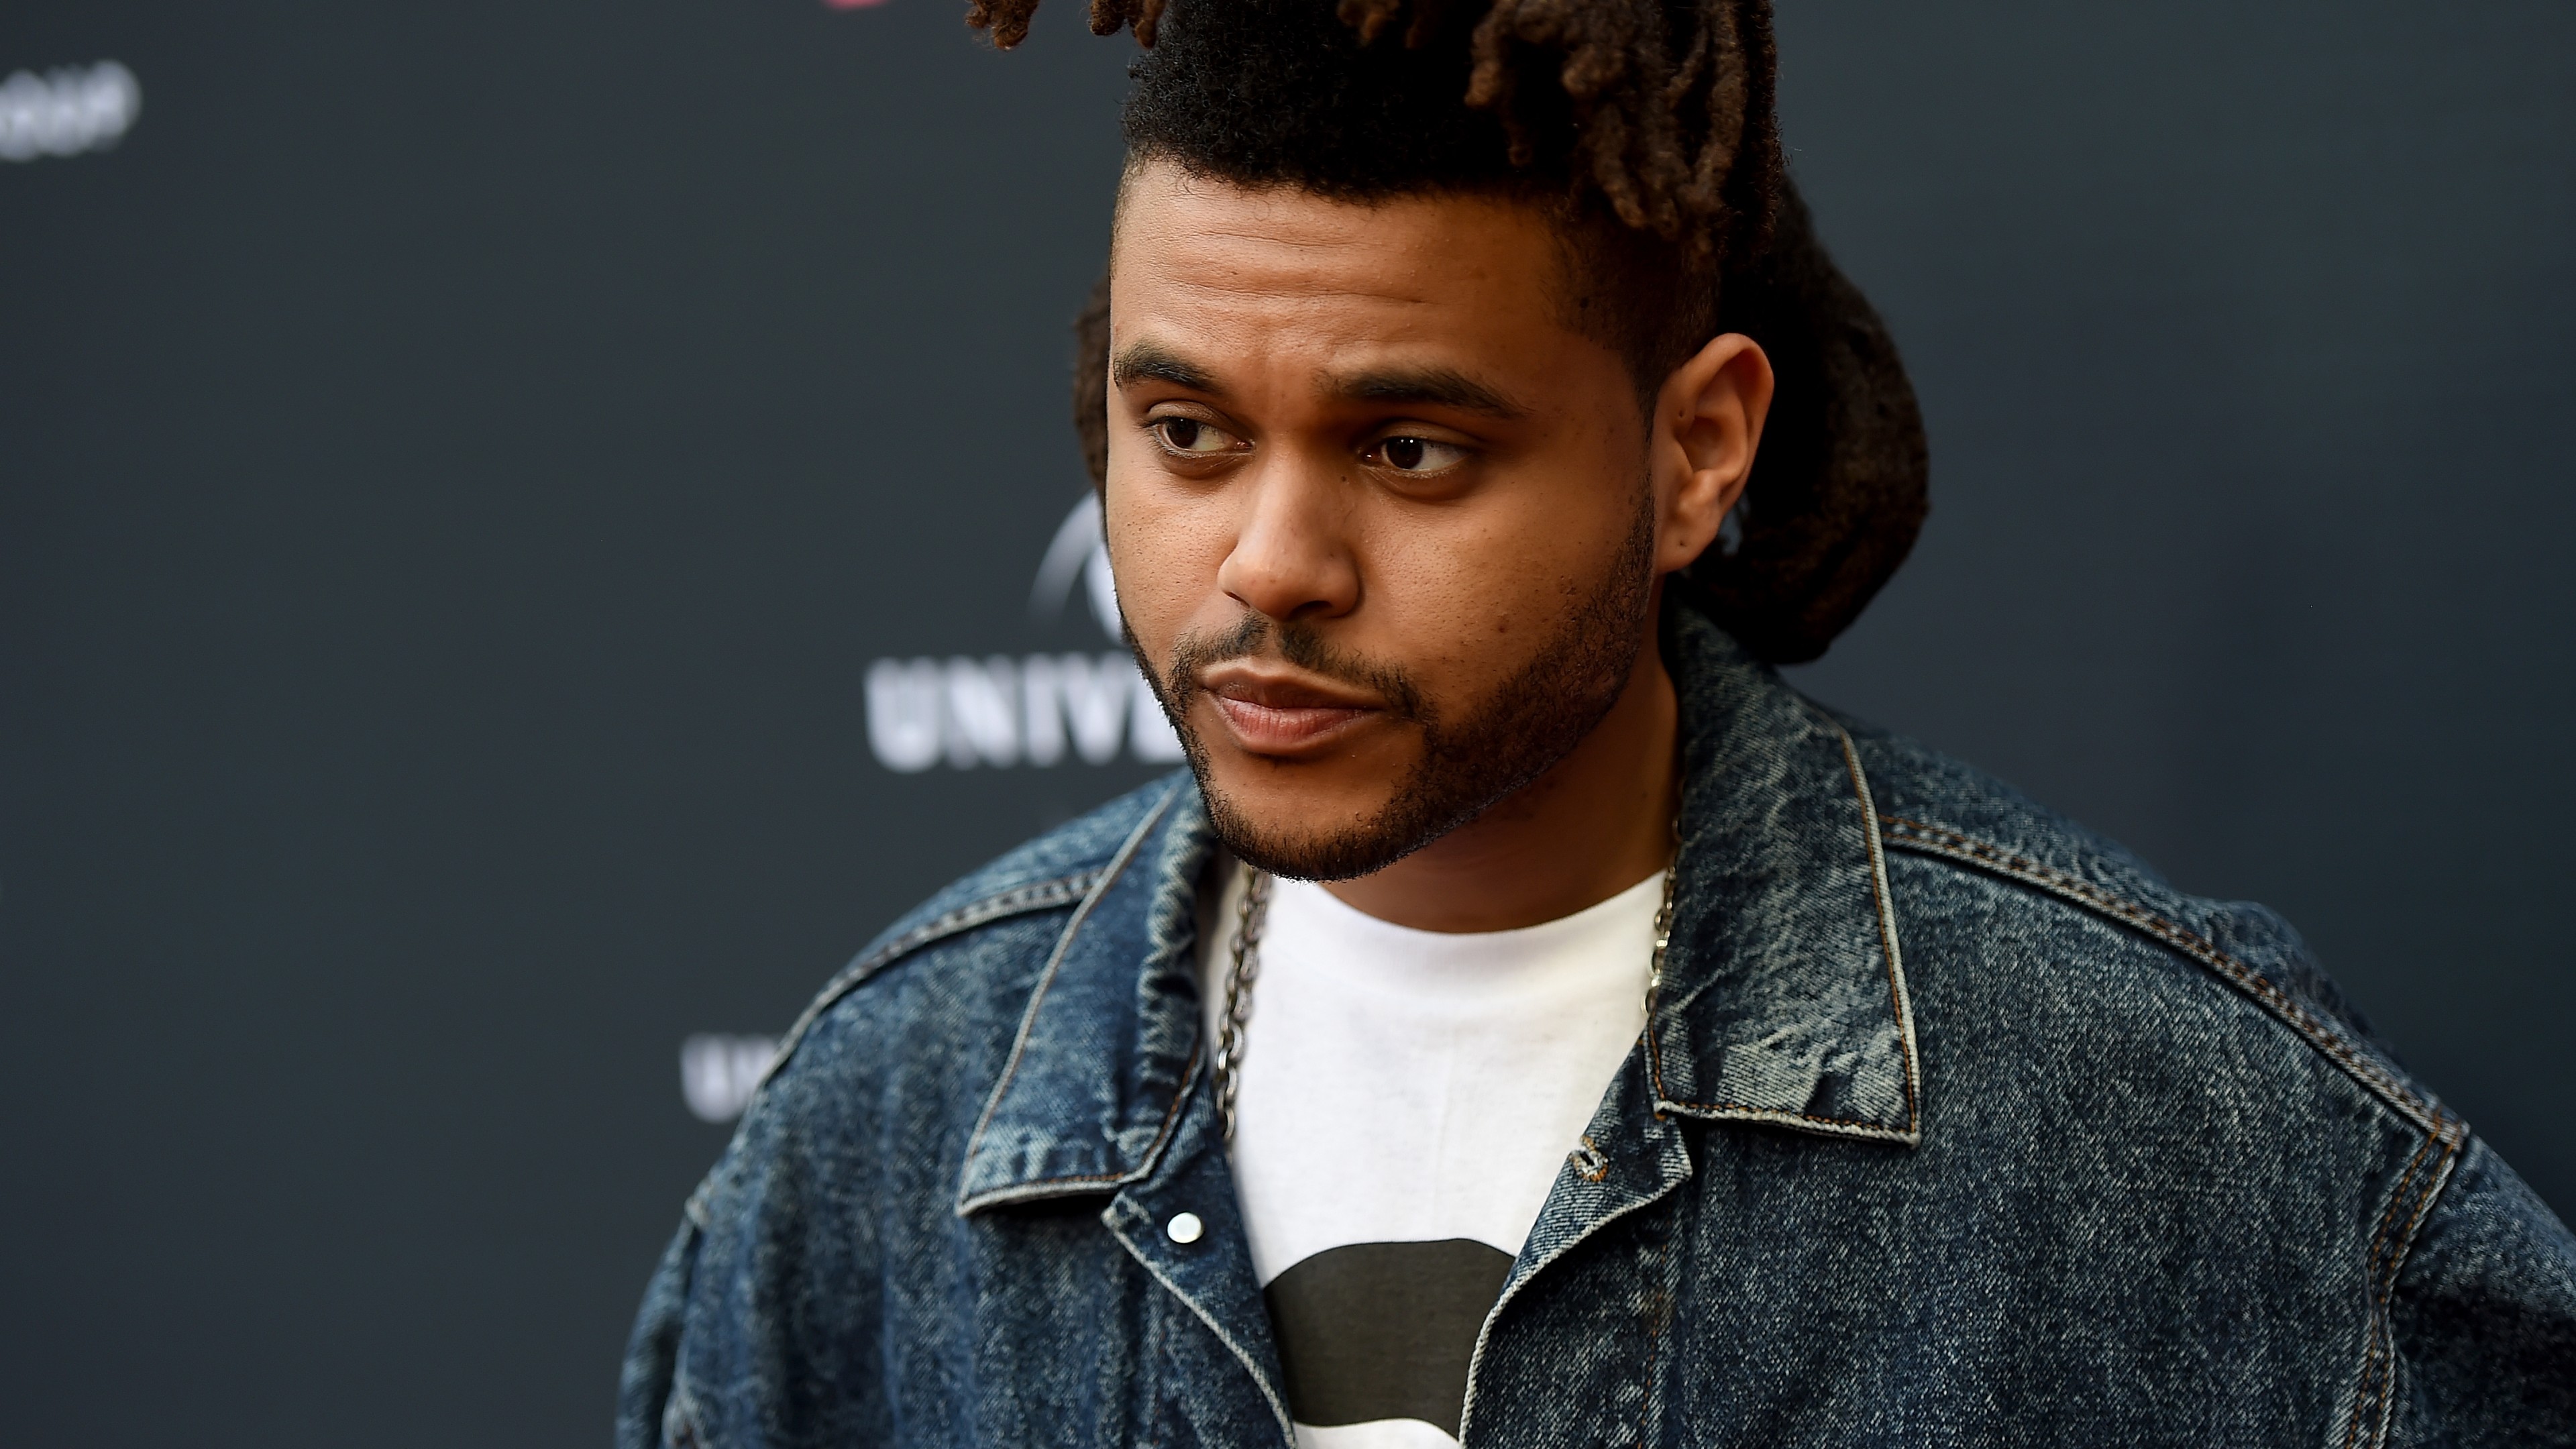 Wallpaper The Weeknd, Abel Tesfaye, Top music artist and bands, Music